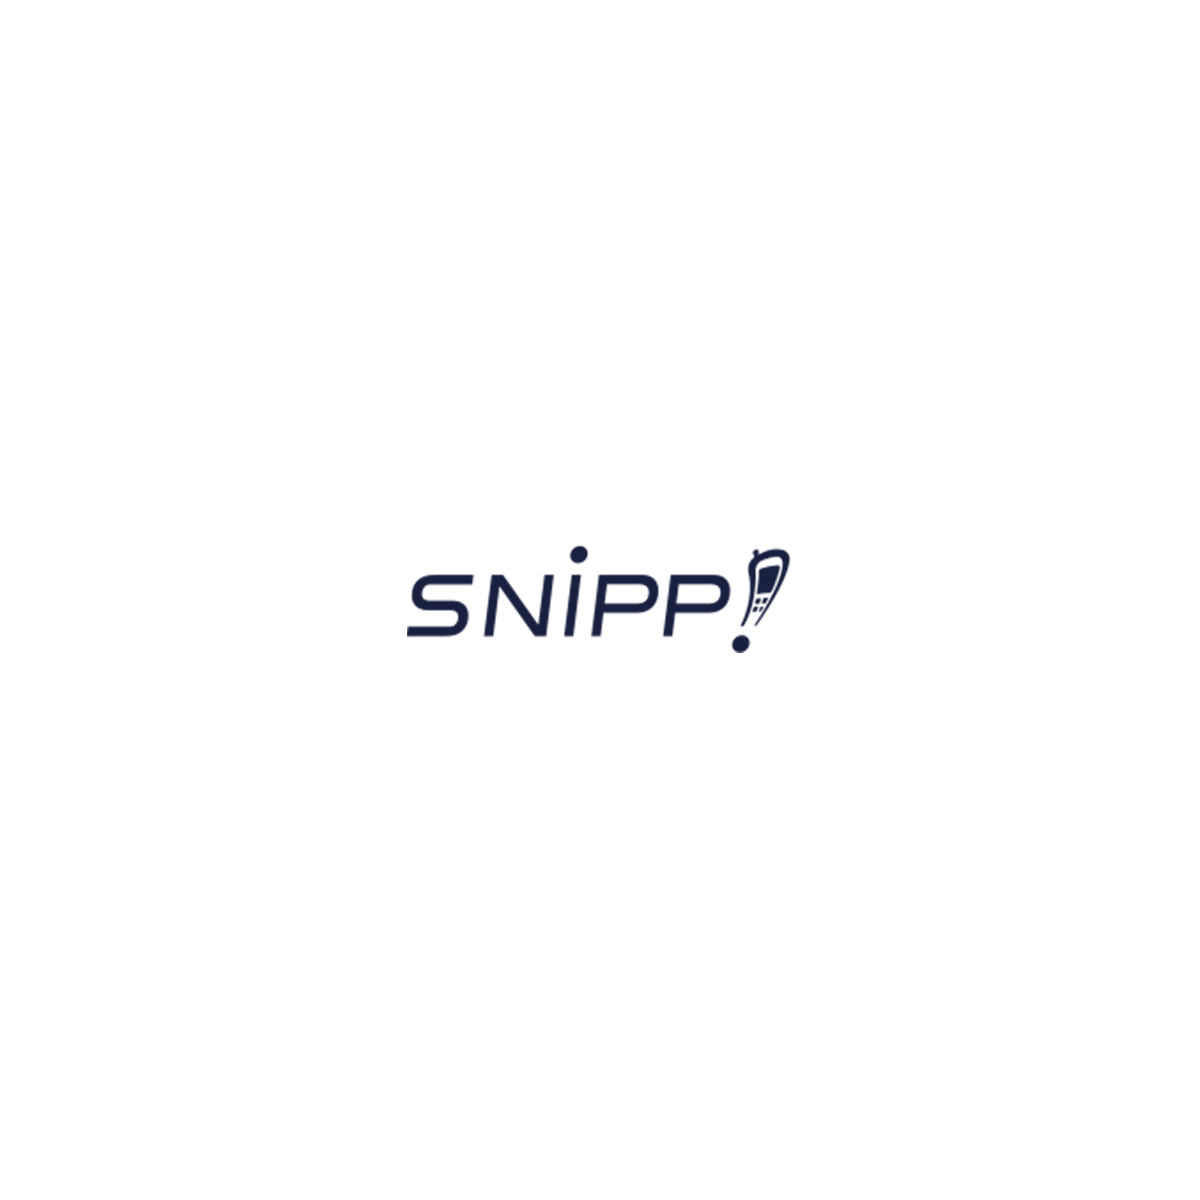 Snipp Adds Bitcoin And Share Ownership Incentives To Its Snipp Rewards Platform